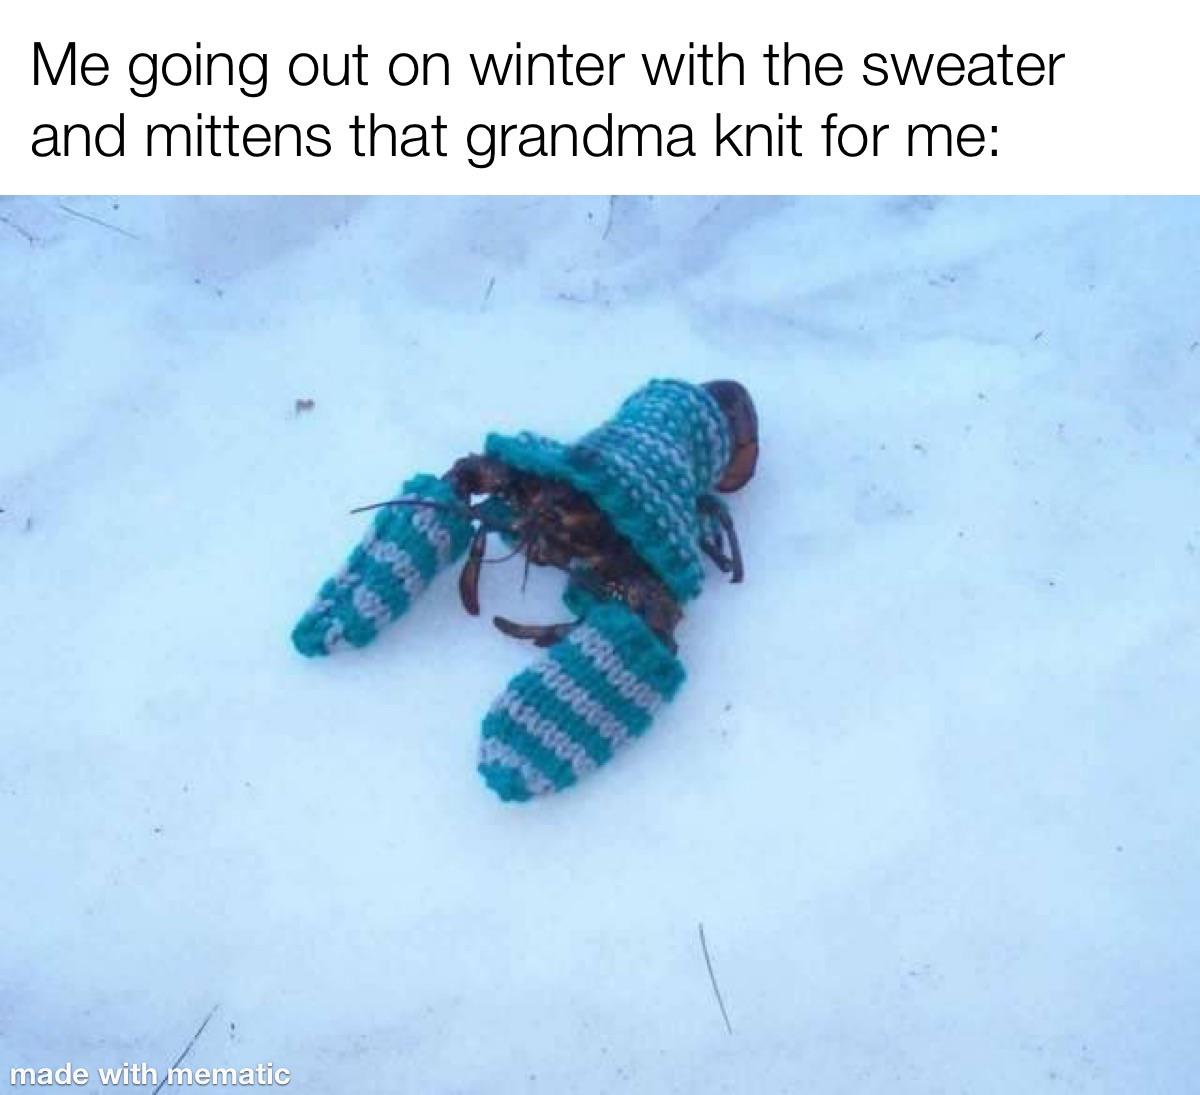 lobster snow - Me going out on winter with the sweater and mittens that grandma knit for me made with mematic